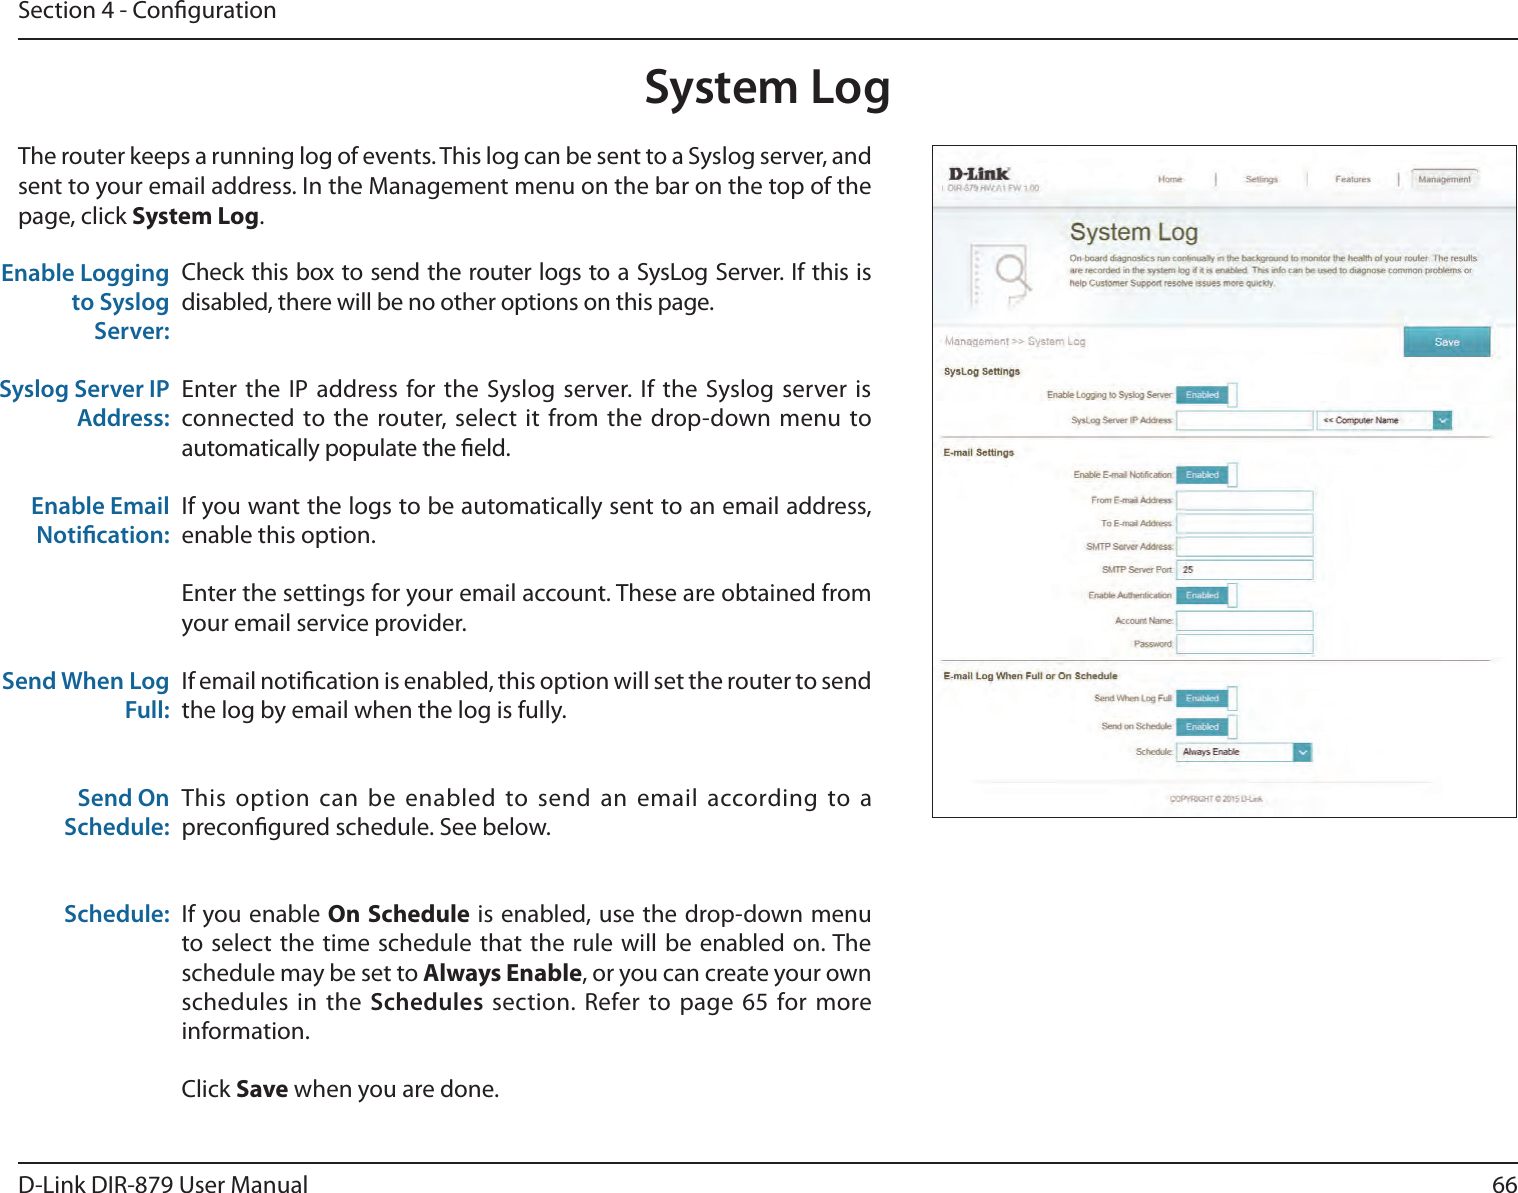 66D-Link DIR-879 User ManualSection 4 - CongurationSystem LogCheck this box to send the router logs to a SysLog Server. If this is disabled, there will be no other options on this page.Enter the IP address for the Syslog server. If the Syslog server is connected to the router, select it from the drop-down menu to automatically populate the eld. If you want the logs to be automatically sent to an email address, enable this option.Enter the settings for your email account. These are obtained from your email service provider.If email notication is enabled, this option will set the router to send the log by email when the log is fully.This option can be enabled to send an email according to a precongured schedule. See below.If you enable On Schedule is enabled, use the drop-down menu to select the time schedule that the rule will be enabled on. The schedule may be set to Always Enable, or you can create your own schedules in the Schedules section. Refer to page 65 for more information.Click Save when you are done.Enable Logging to Syslog Server:Syslog Server IP Address:Enable Email Notication:Send When Log Full:Send On Schedule:Schedule:The router keeps a running log of events. This log can be sent to a Syslog server, and sent to your email address. In the Management menu on the bar on the top of the page, click System Log. 